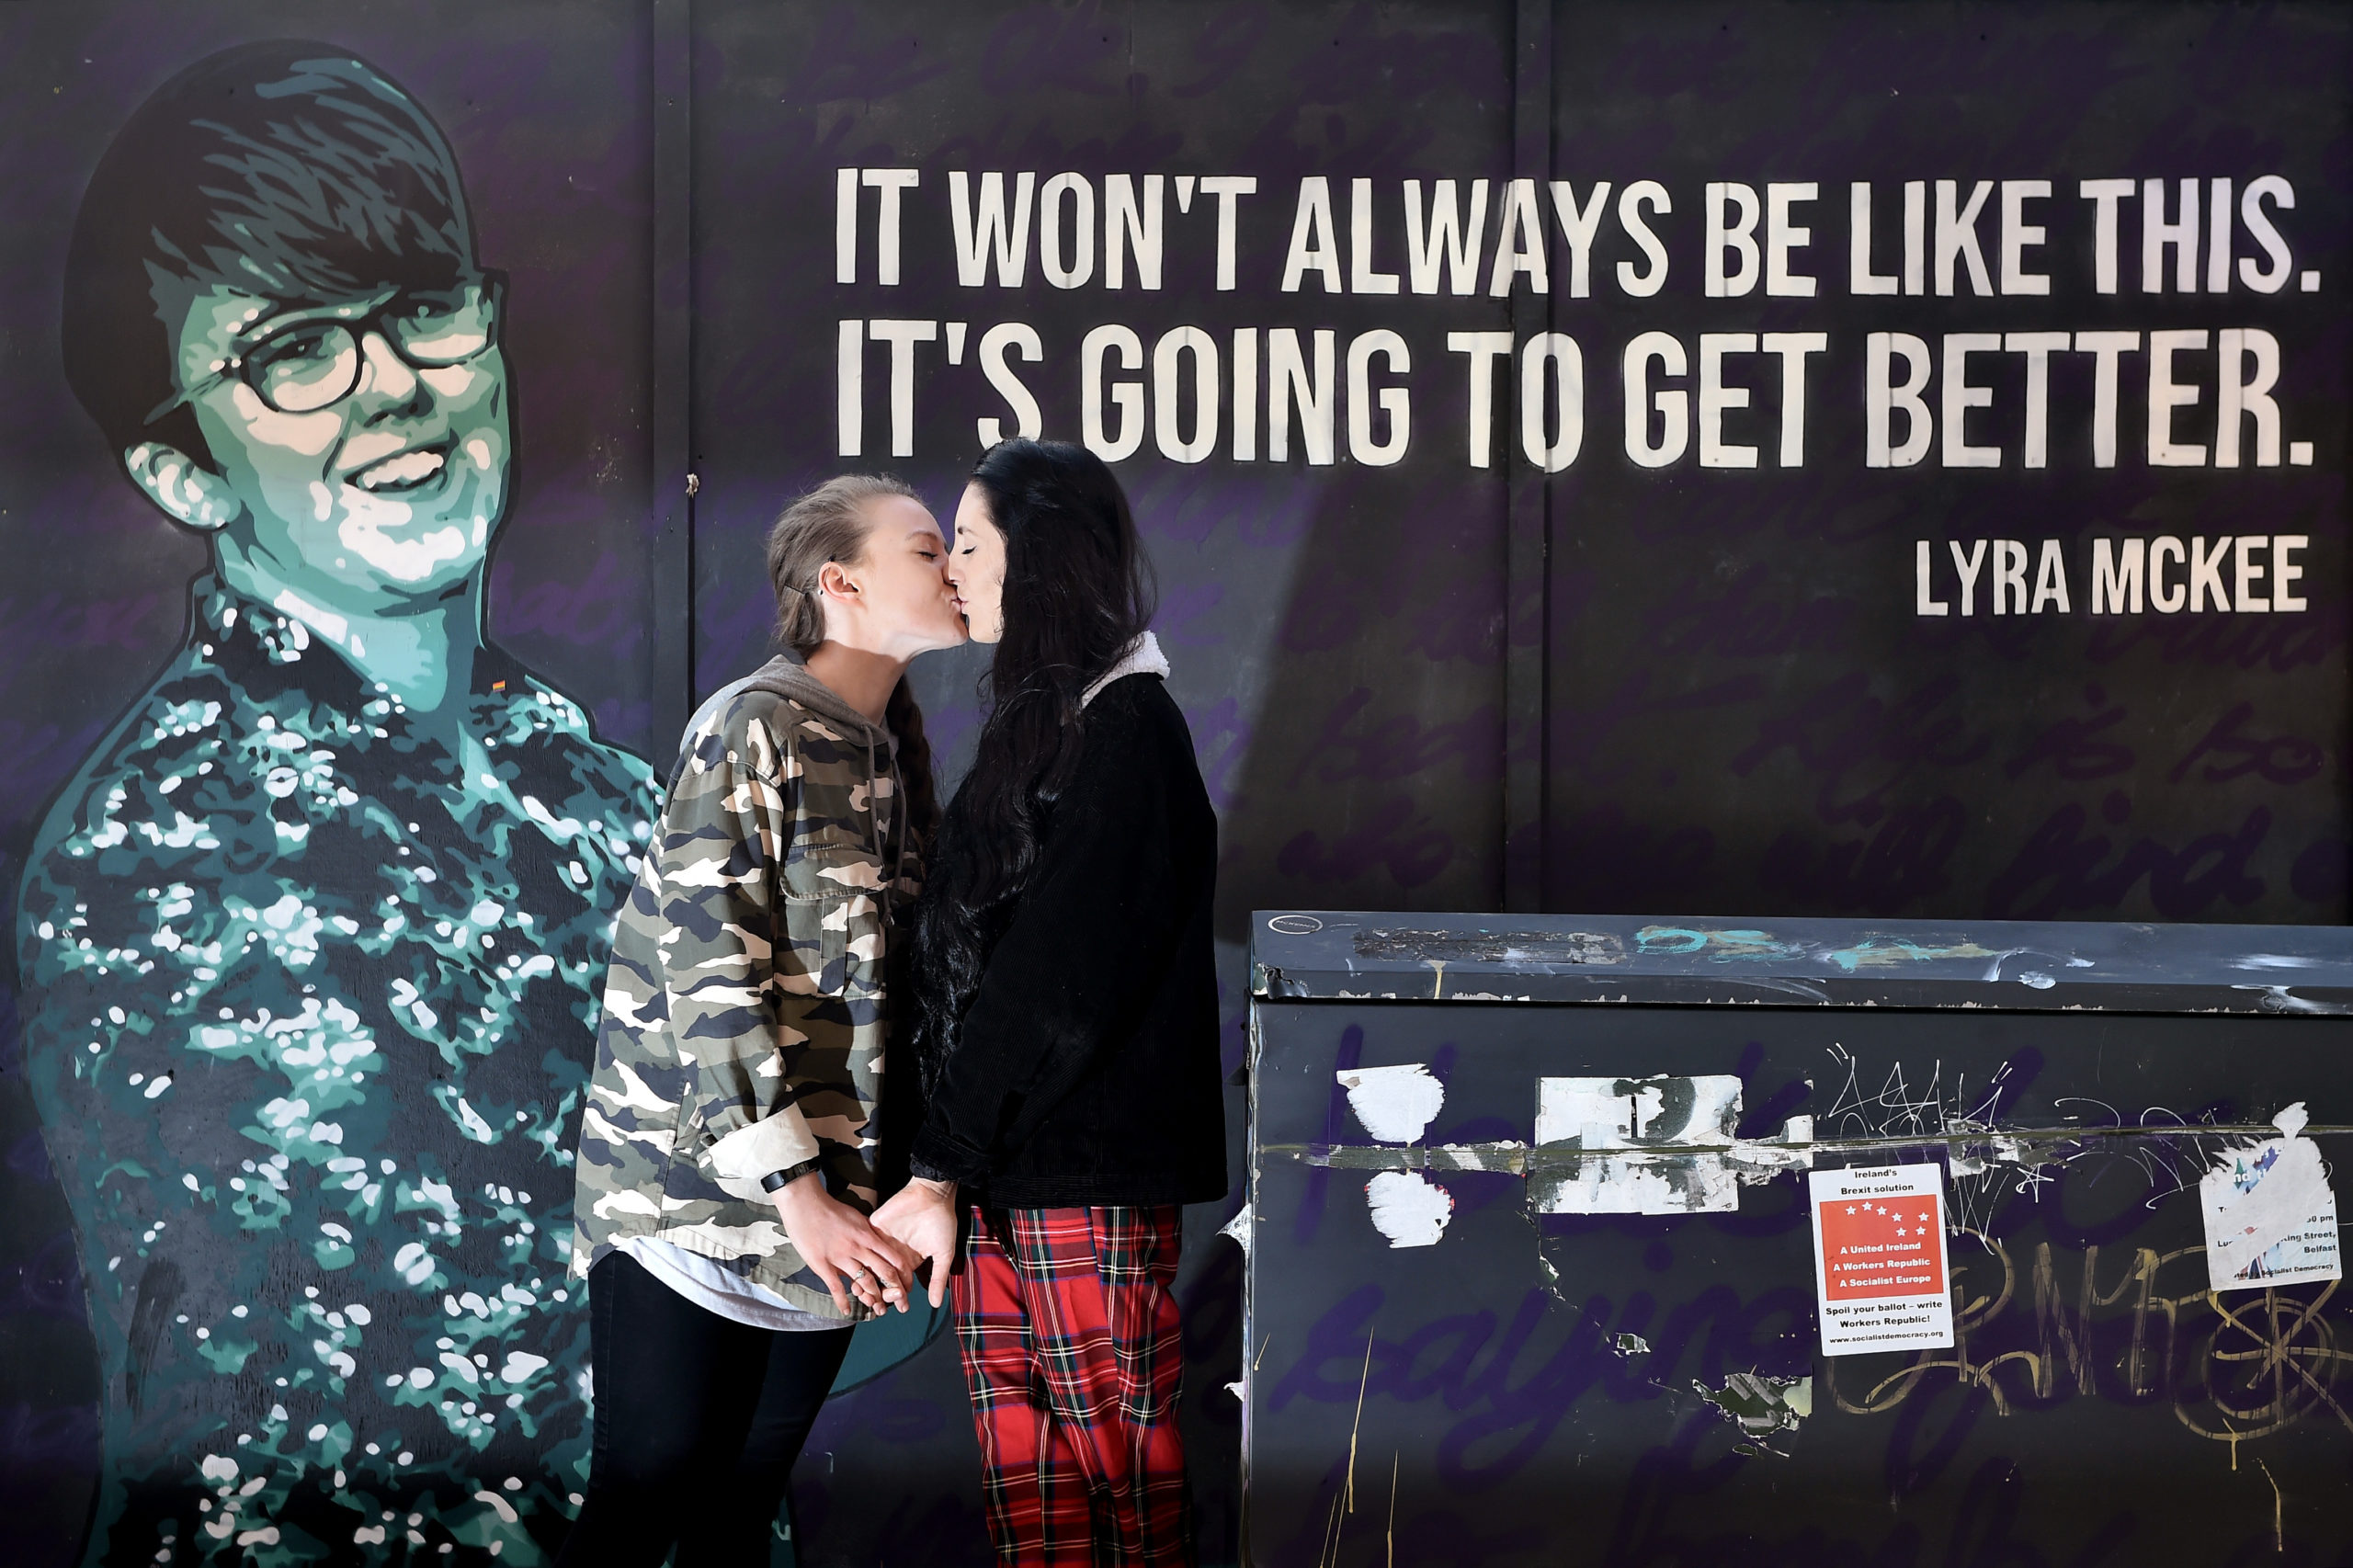 Robyn Peoples and Sharni Edwards, Northern Ireland's first same-sex couple to be legally married, kiss as they pose in front of the Lyra McKee mural in February 2020